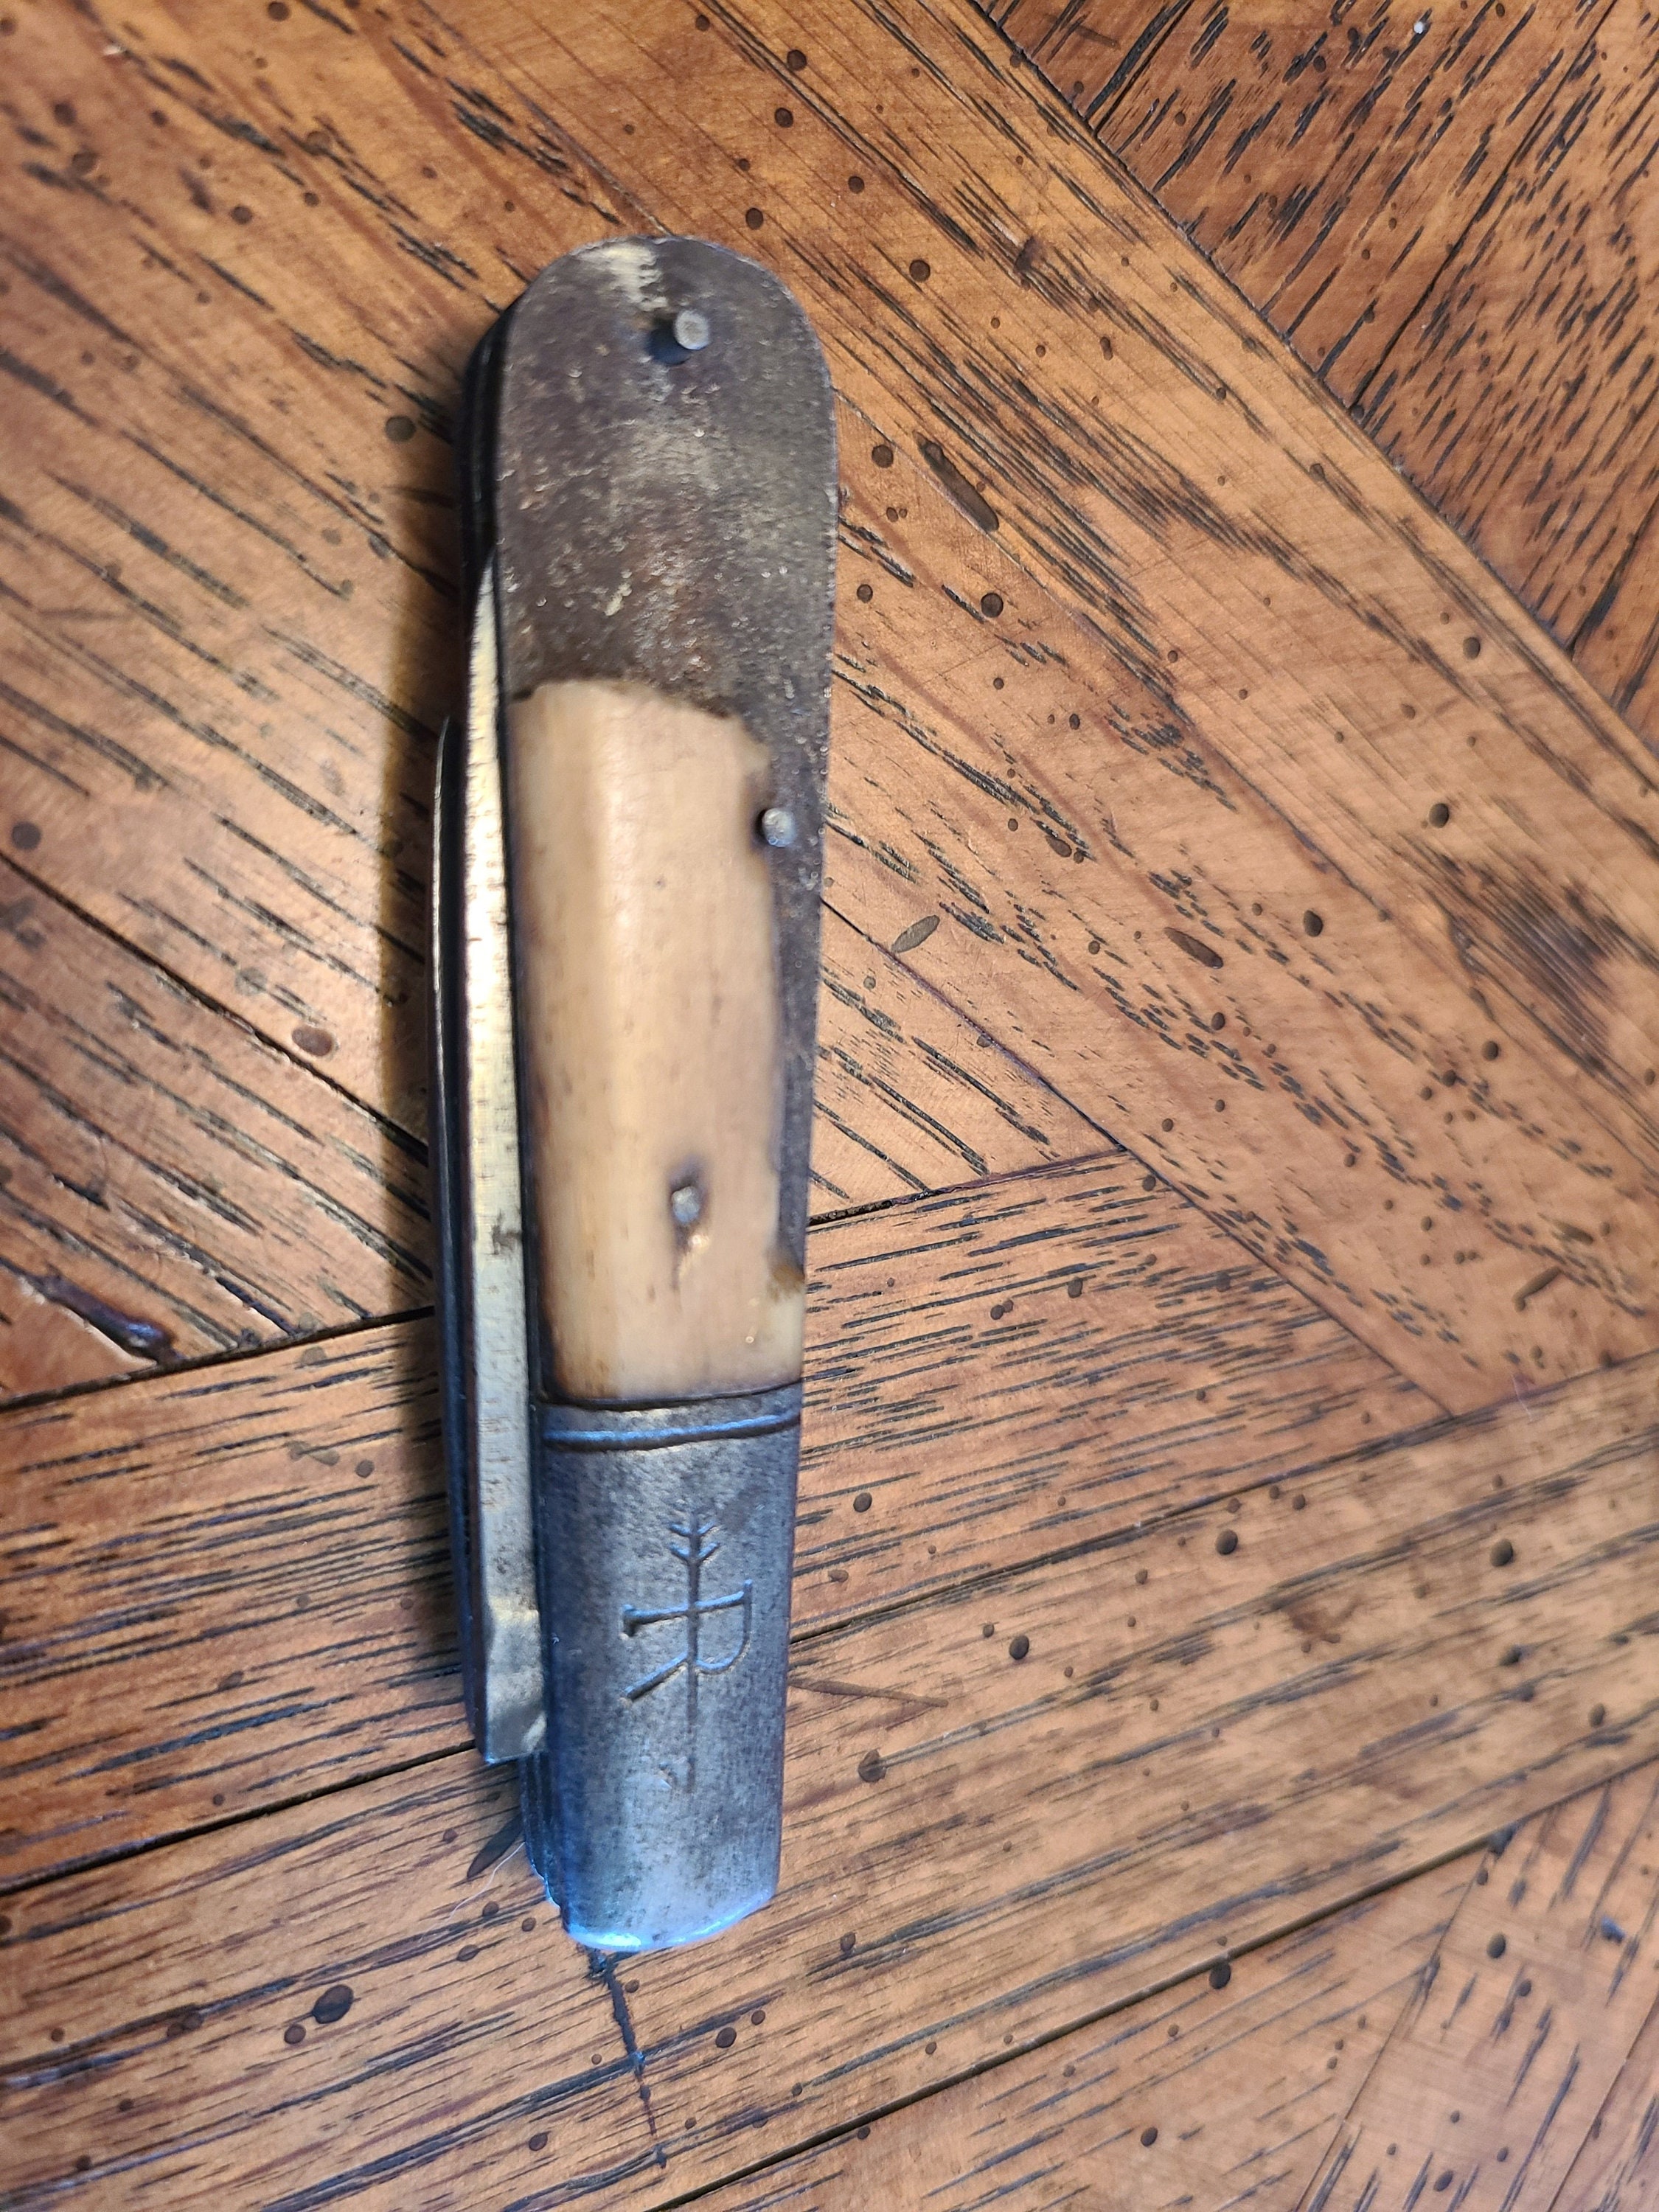 1930s UNUSUAL KNIFE SHARPENER, Patented, From the Depression Era. Vintage  Sharpening Multitool for Kitchen or Workshop. -  Norway